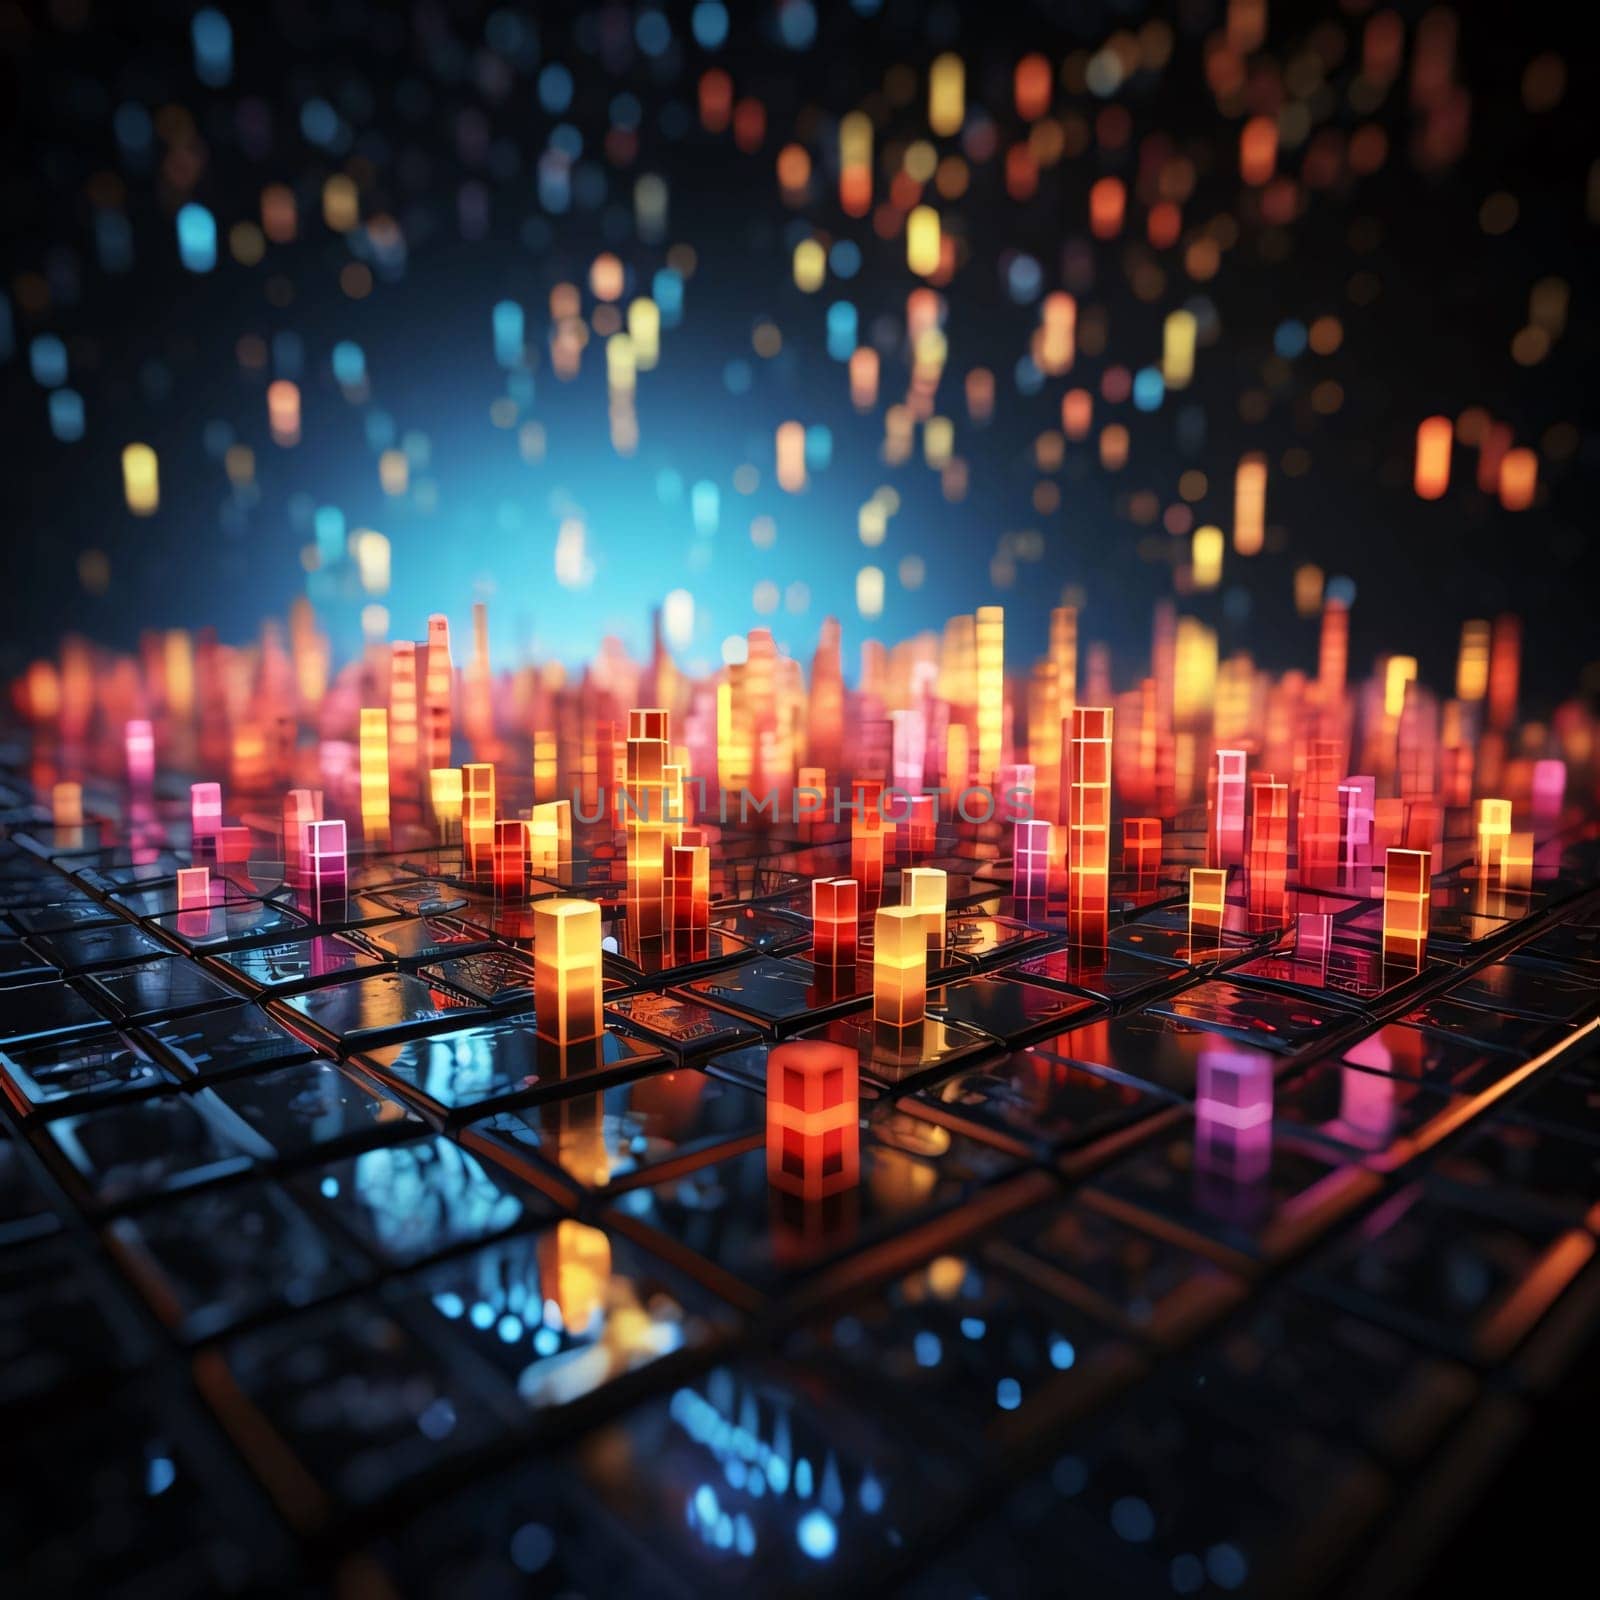 Abstract background design: 3d illustration of abstract background with glowing cubes and numbers in cyberspace